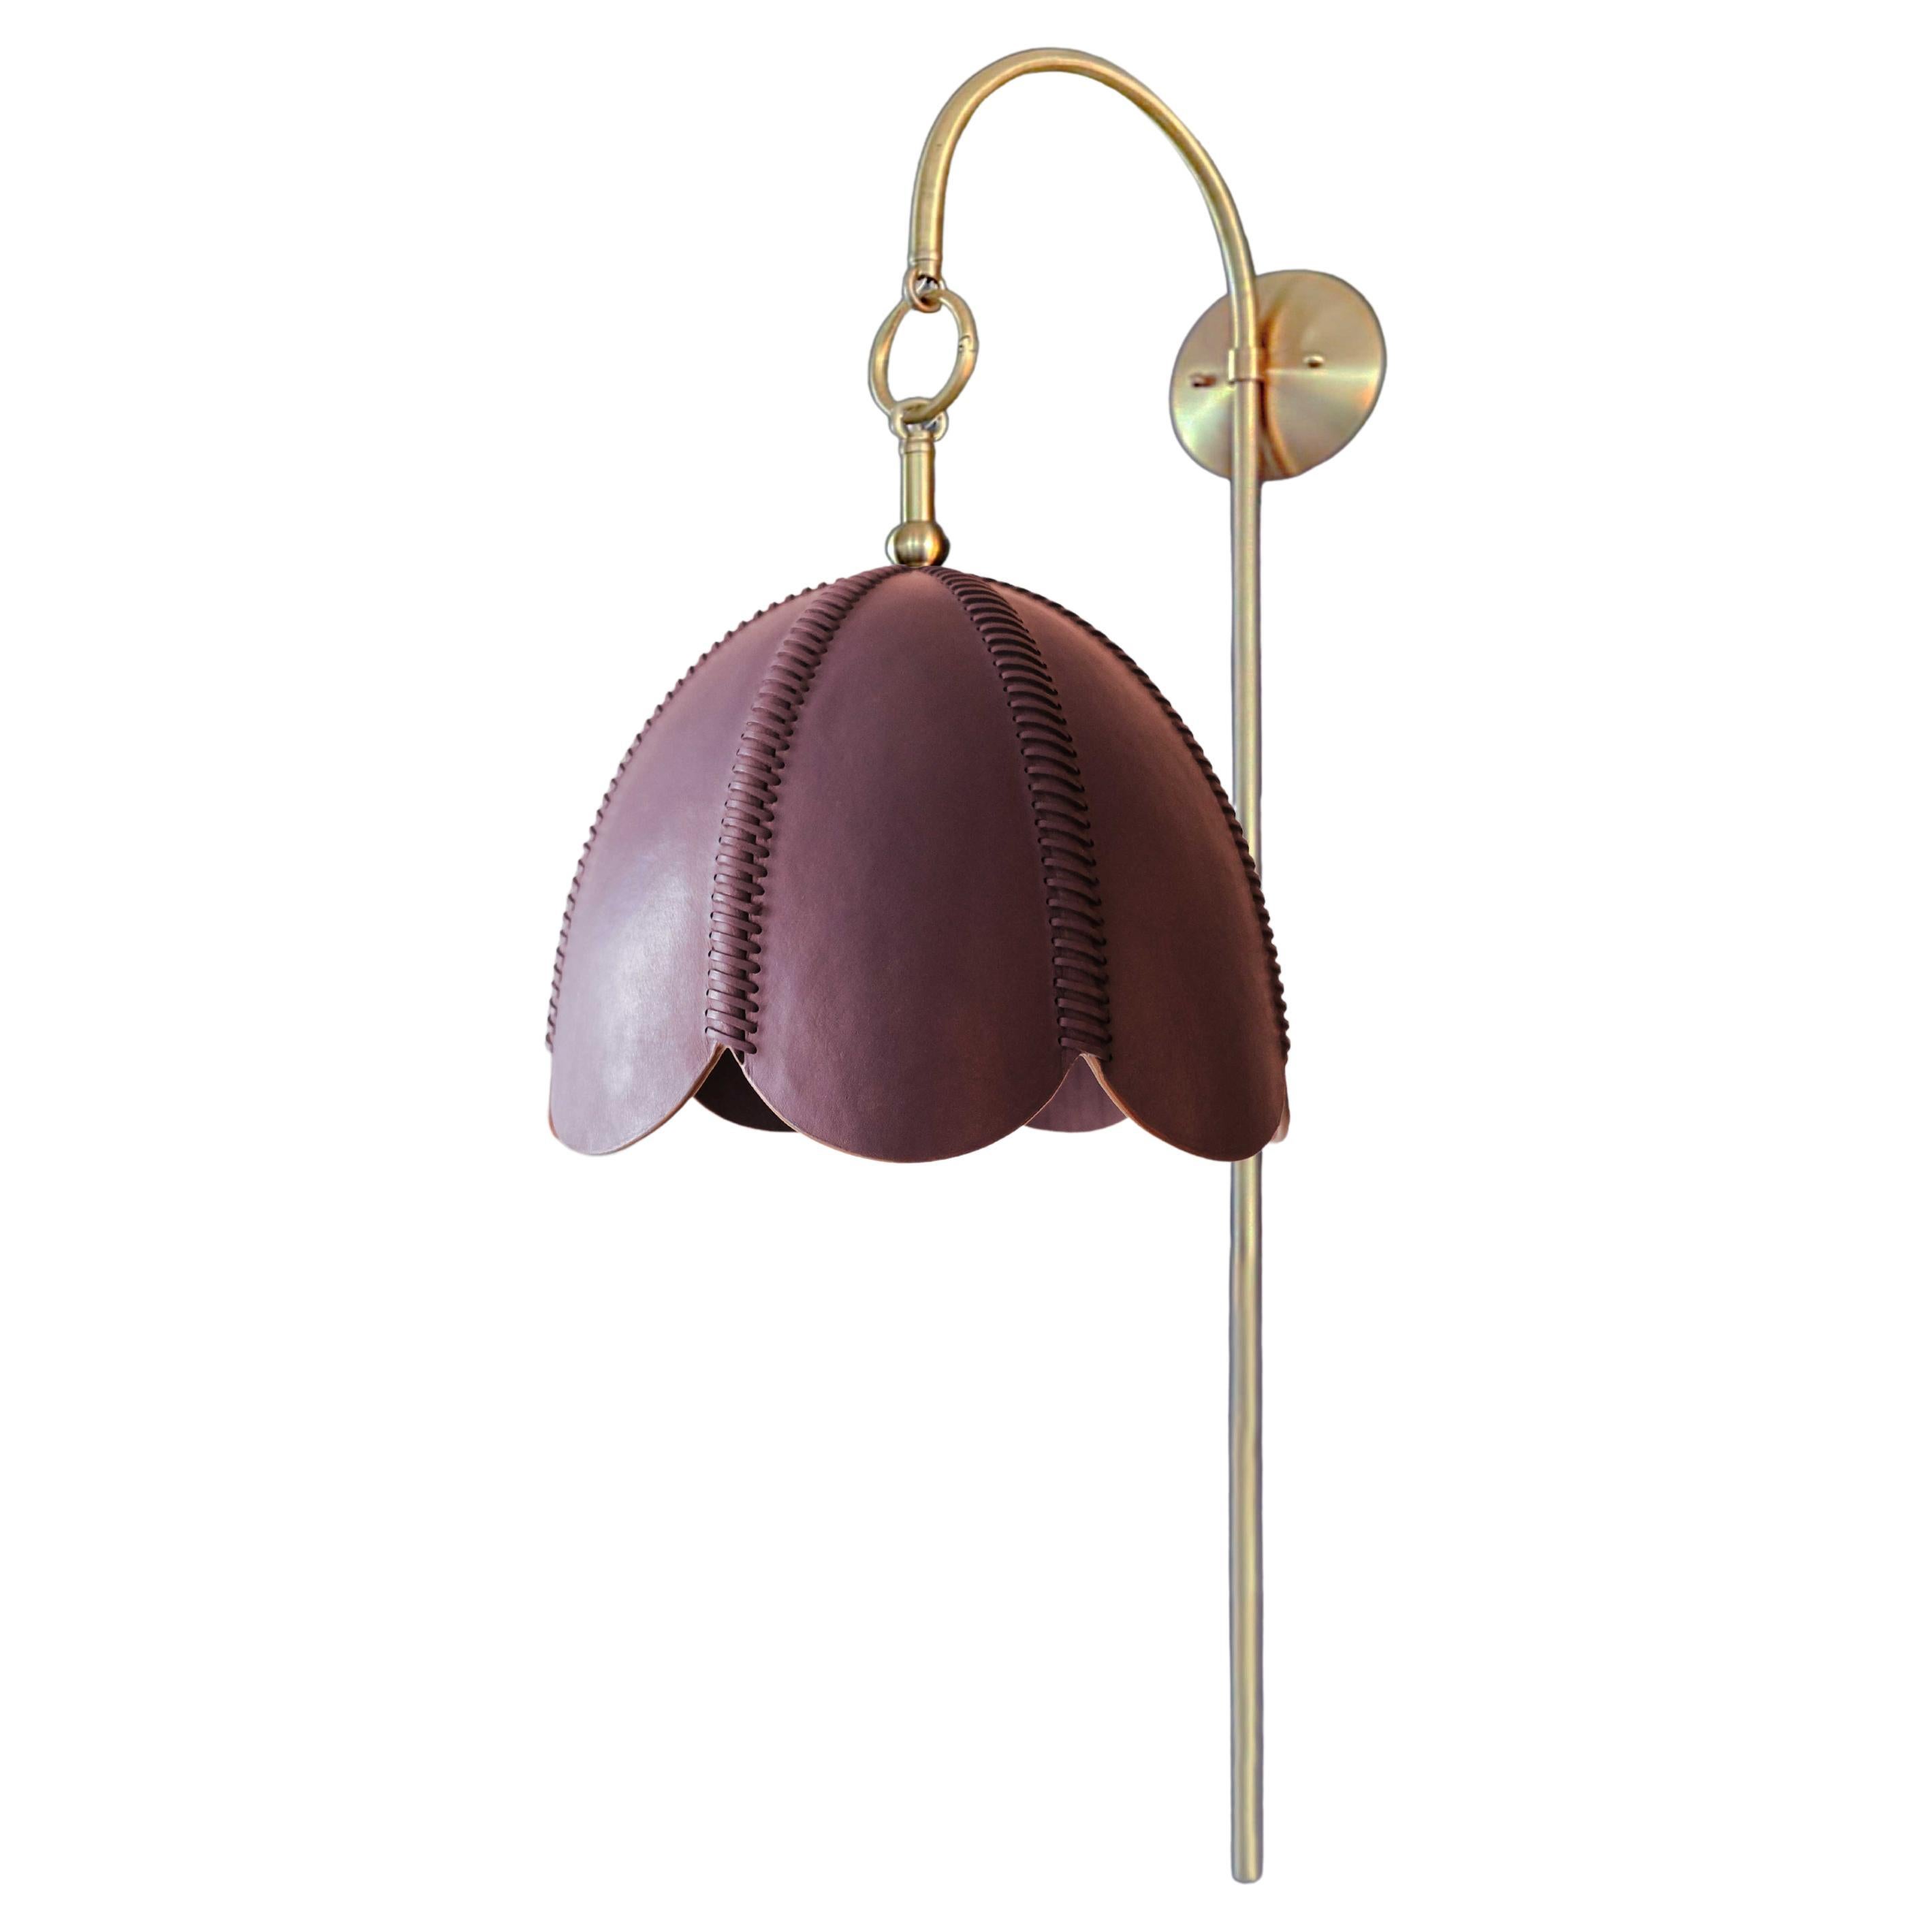 Leather Arched Sconce, Berry, Small, Doma, Saddle Lamp Collection For Sale